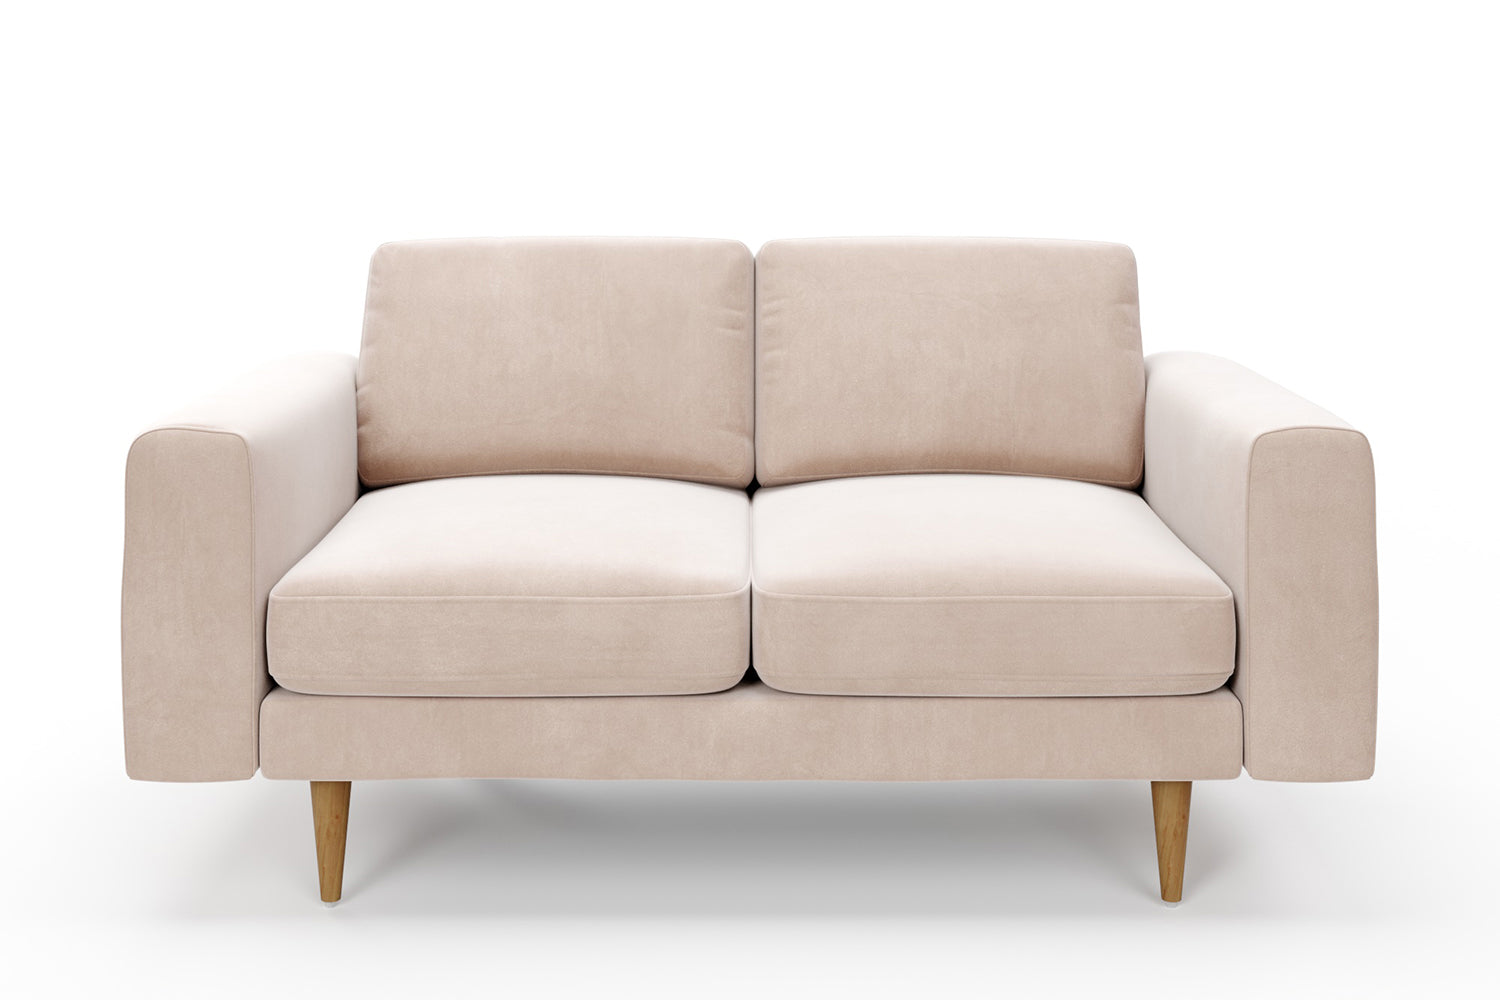 SNUG | The Big Chill 2 Seater Sofa in Taupe variant_40414877909040